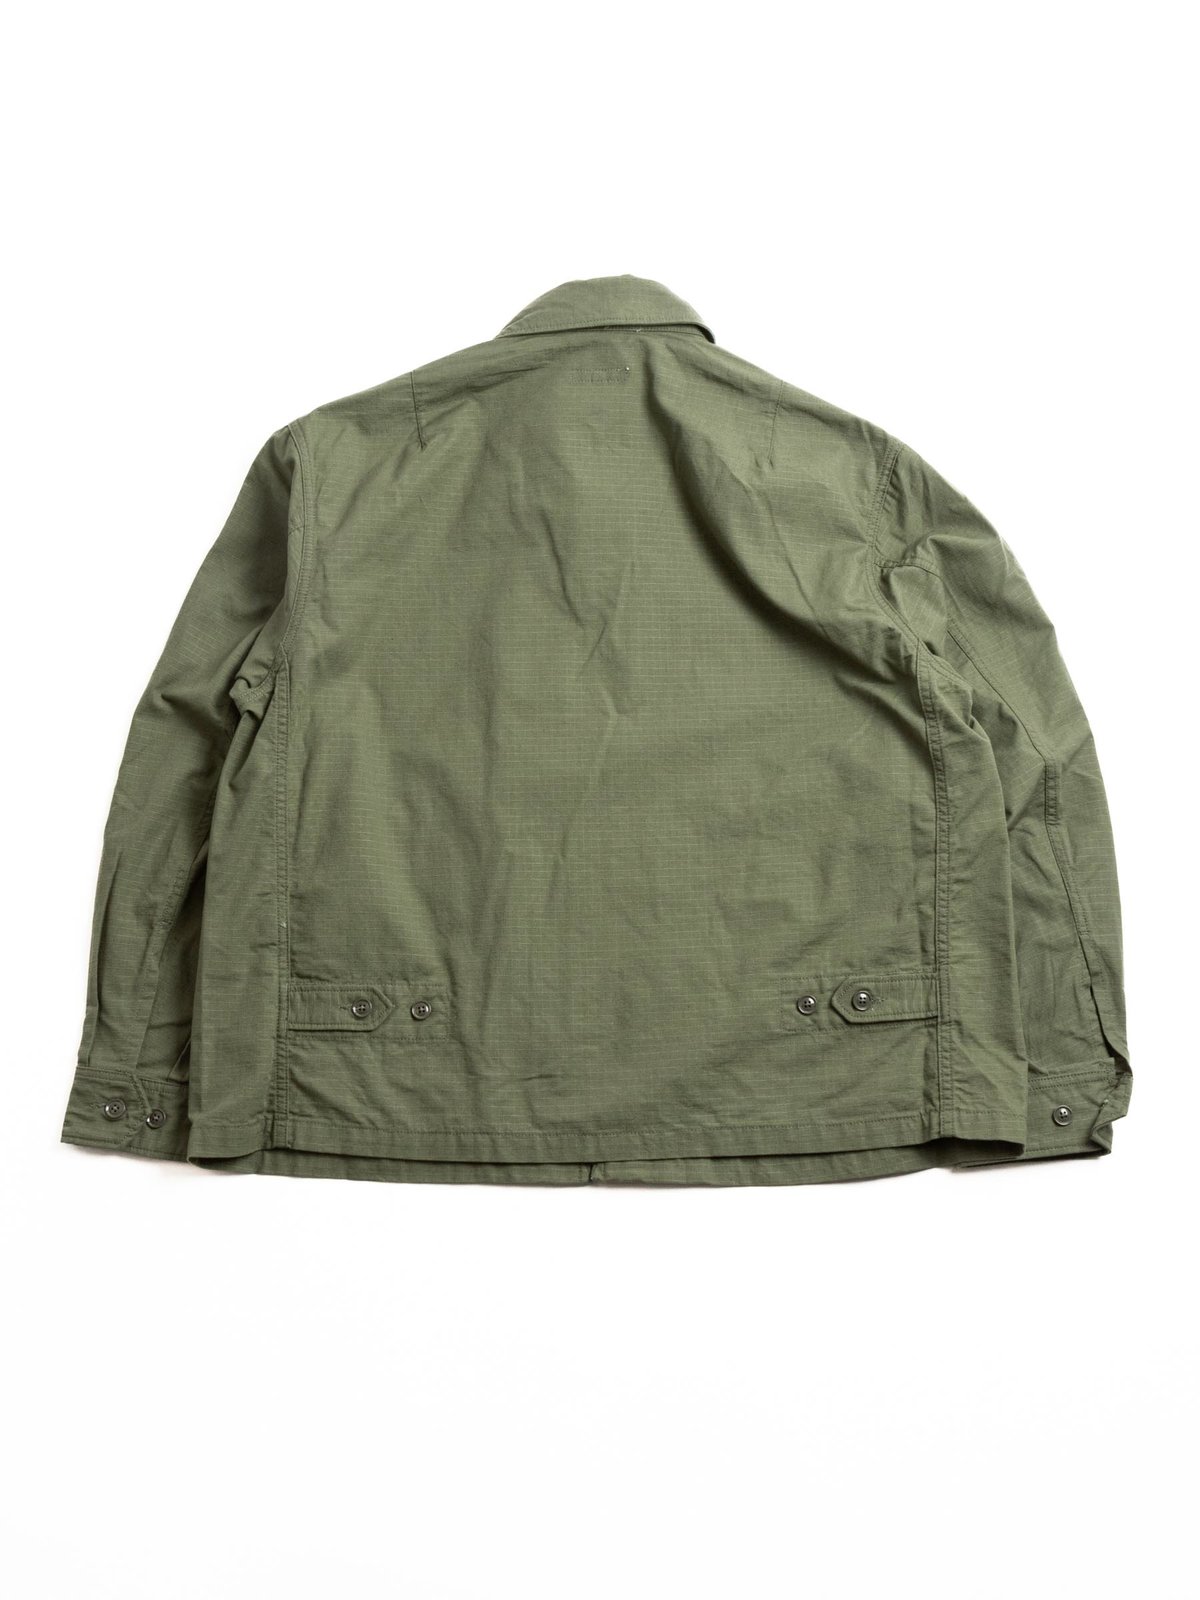 CLAIGTON JACKET OLIVE COTTON RIPSTOP by Engineered Garments – The ...